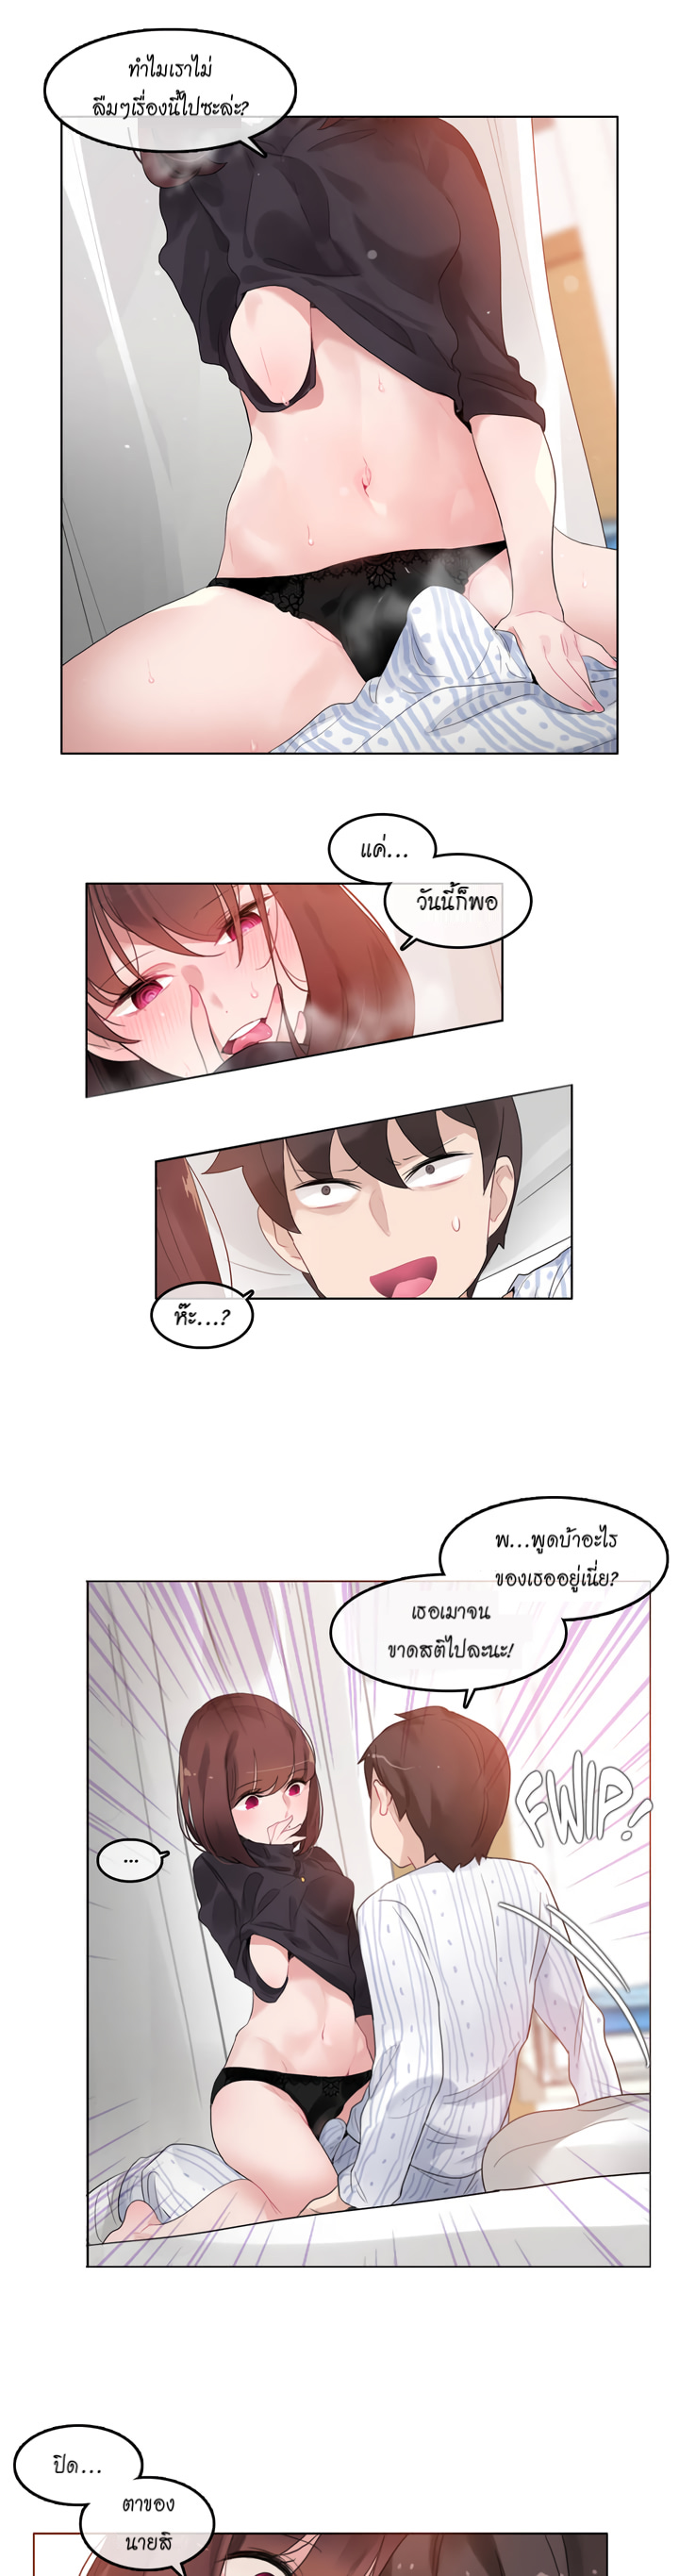 A Pervert’s Daily Life51 (1)